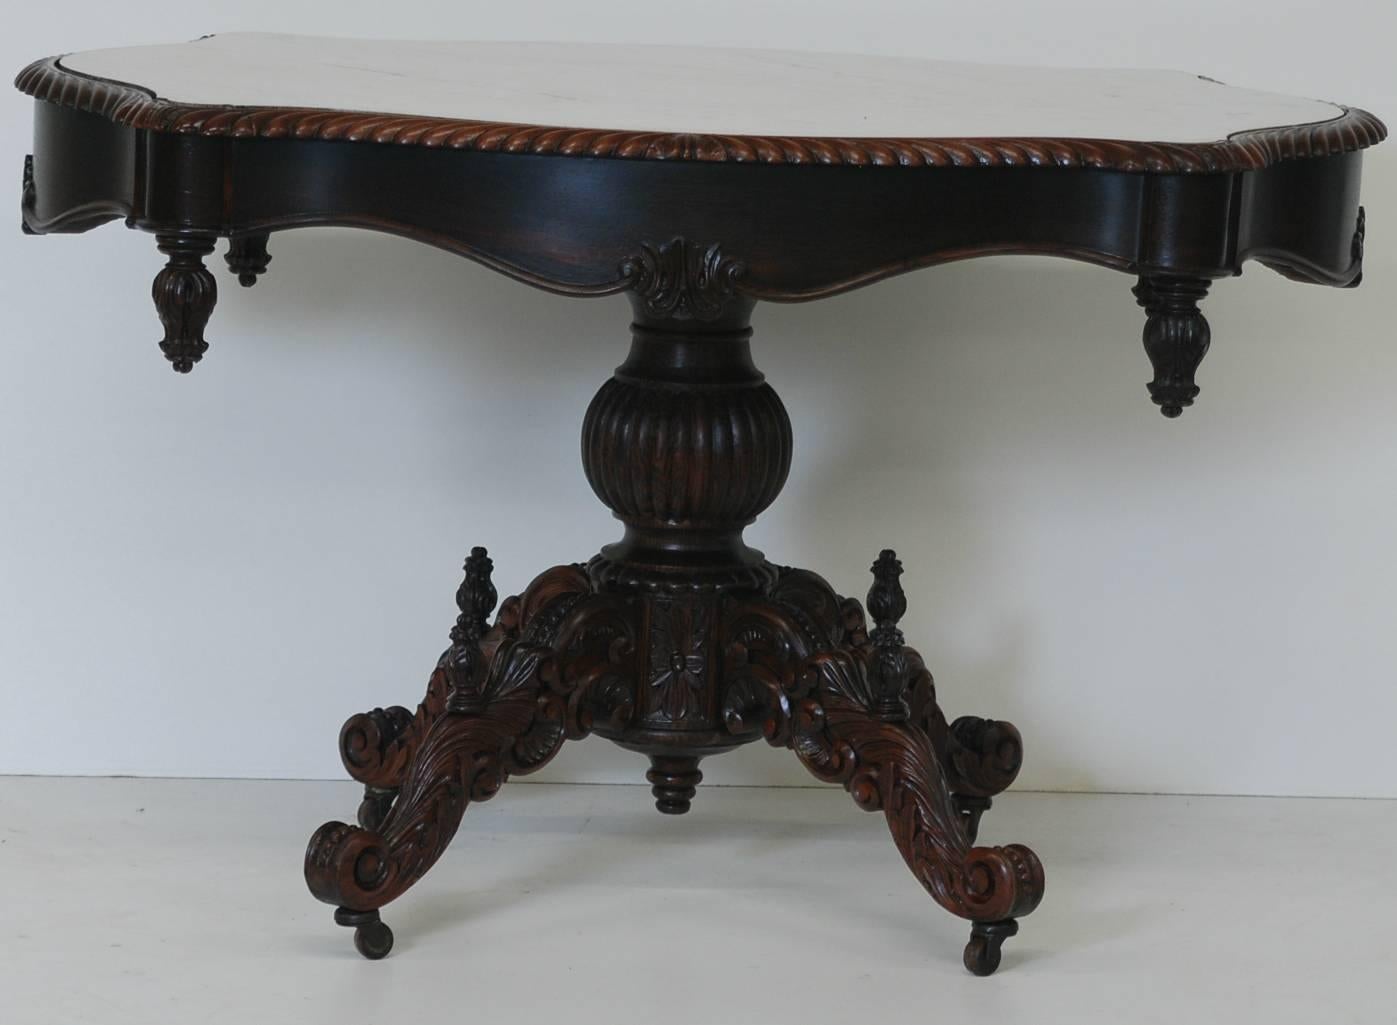 Carved mahogany marble turtle top center table on brass casters.